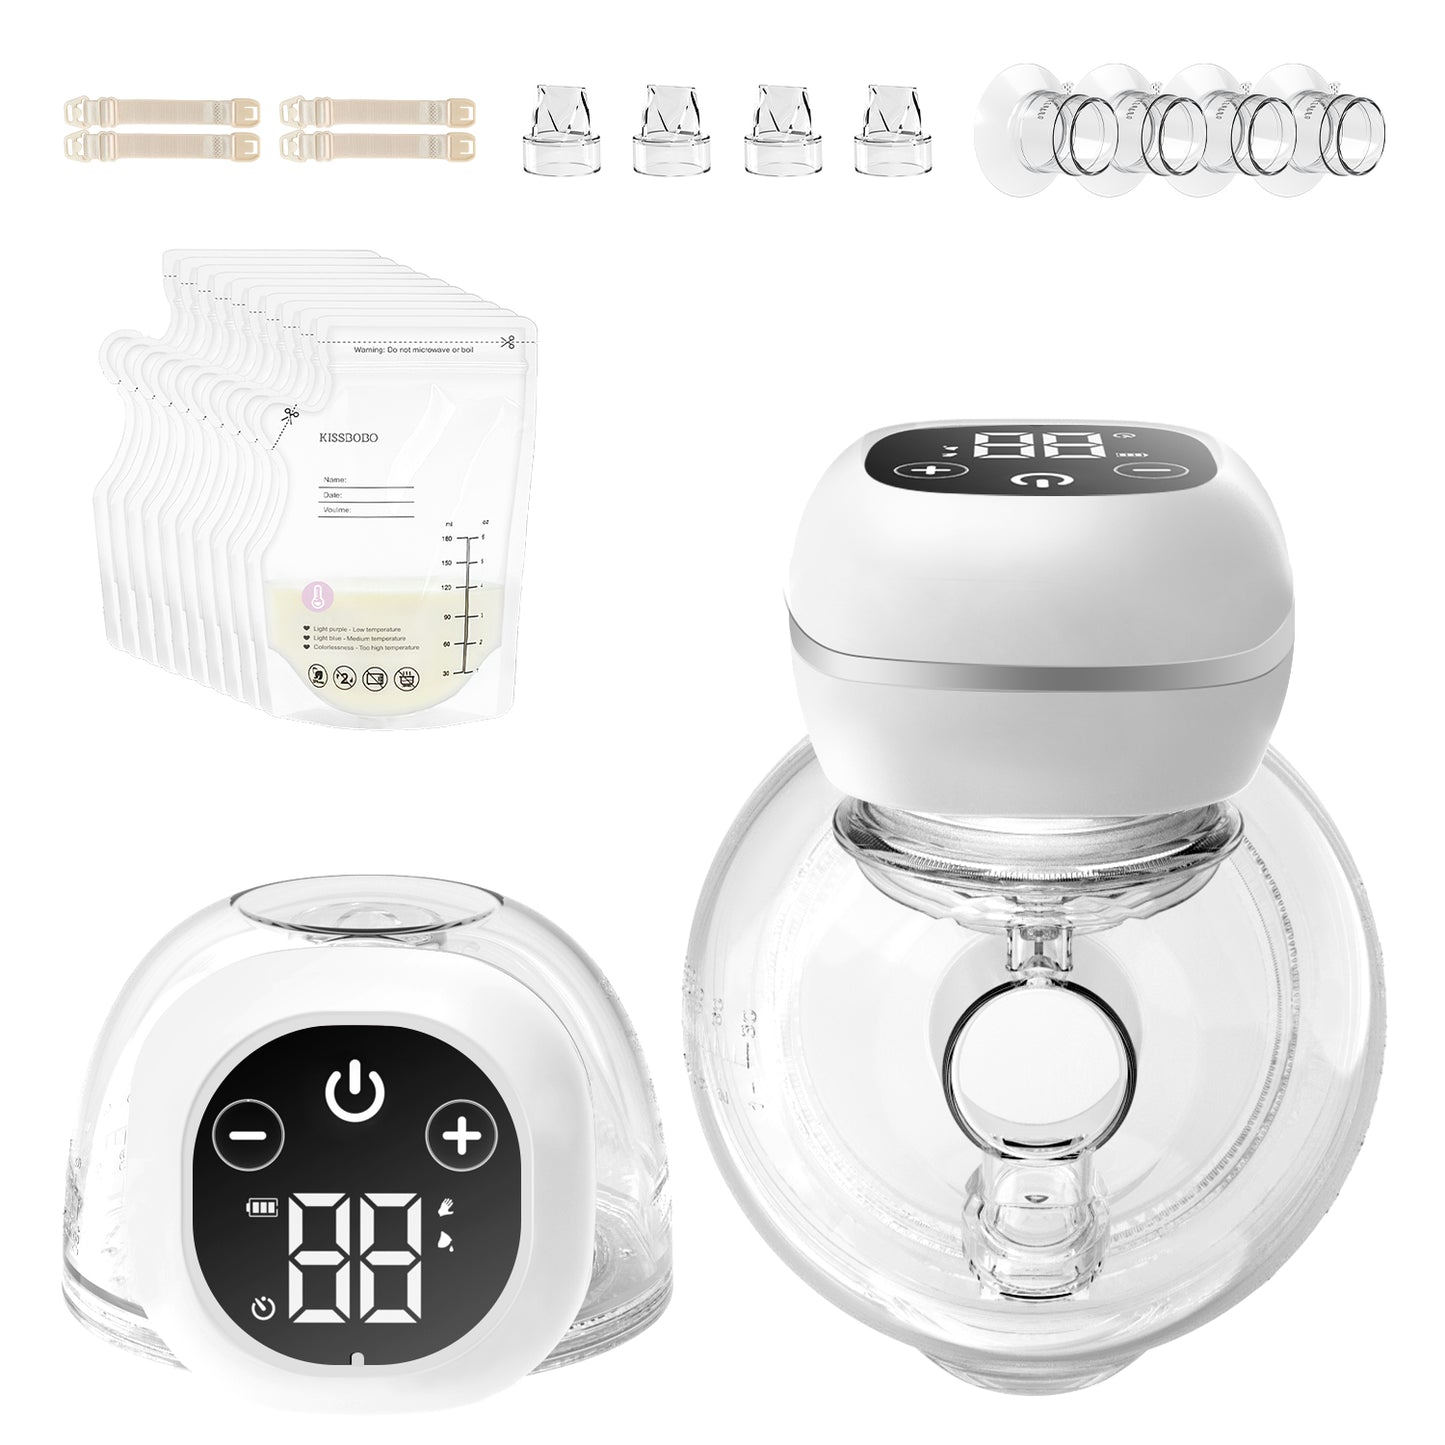 KISSBOBO Electric Breast Pump 2pack，Powerful, Wearable, and Quiet 3 Modes, 12 Levels, LED Touch Screen